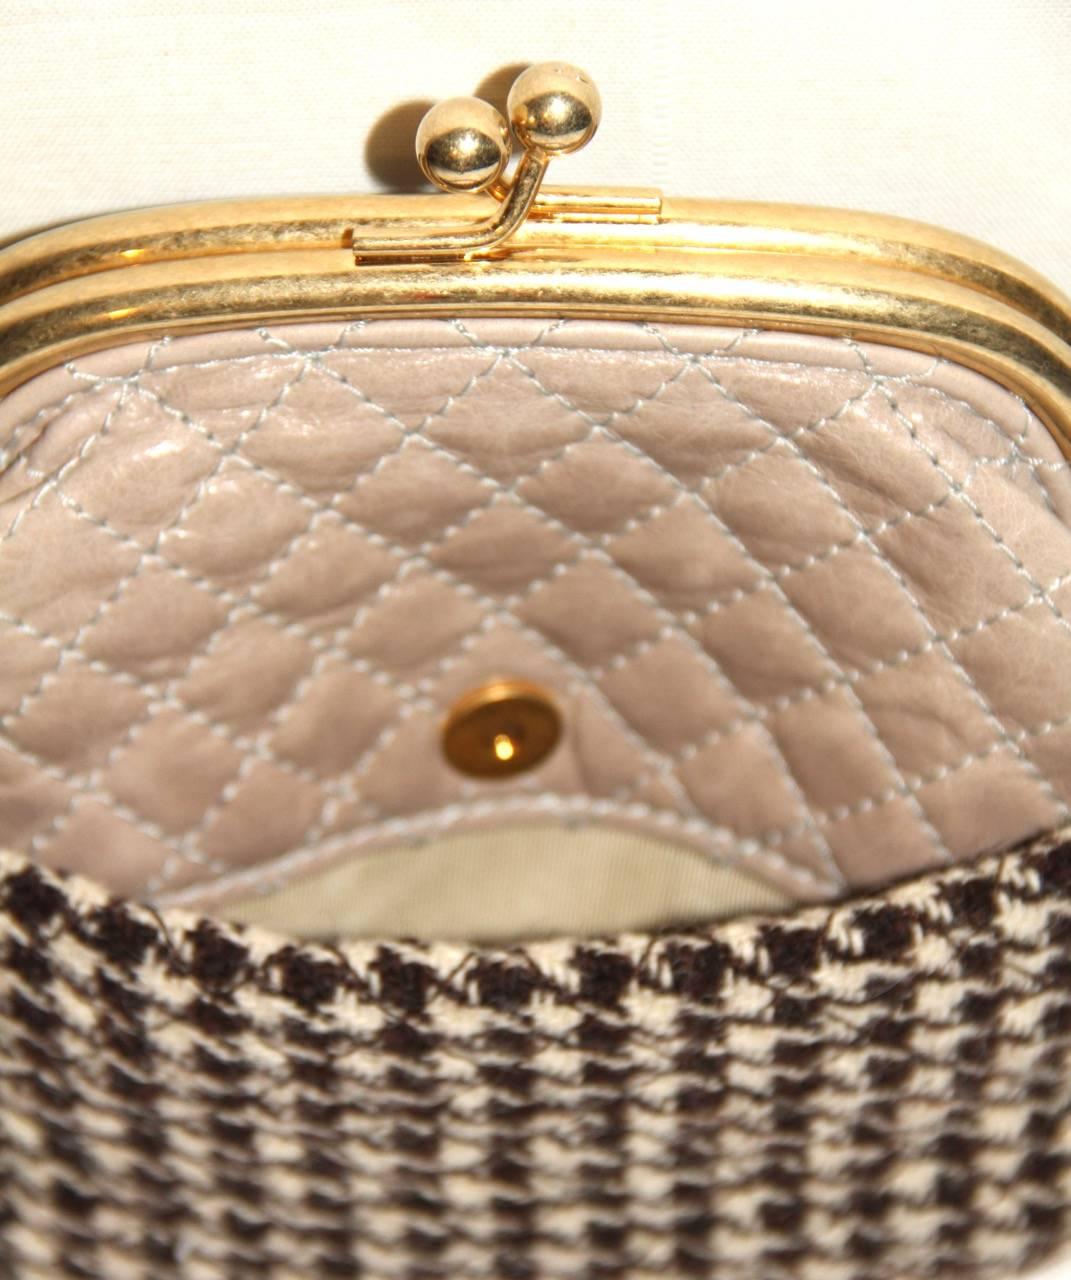 Lovely Chanel wool clutch from the Fall/Winter 2015 Collection. Its design features a XL purse carried as a crossbody bag. The clutch features a thick gold-tone shoulder strap with a leather pad and an exterior flat pocket with clasp closure.